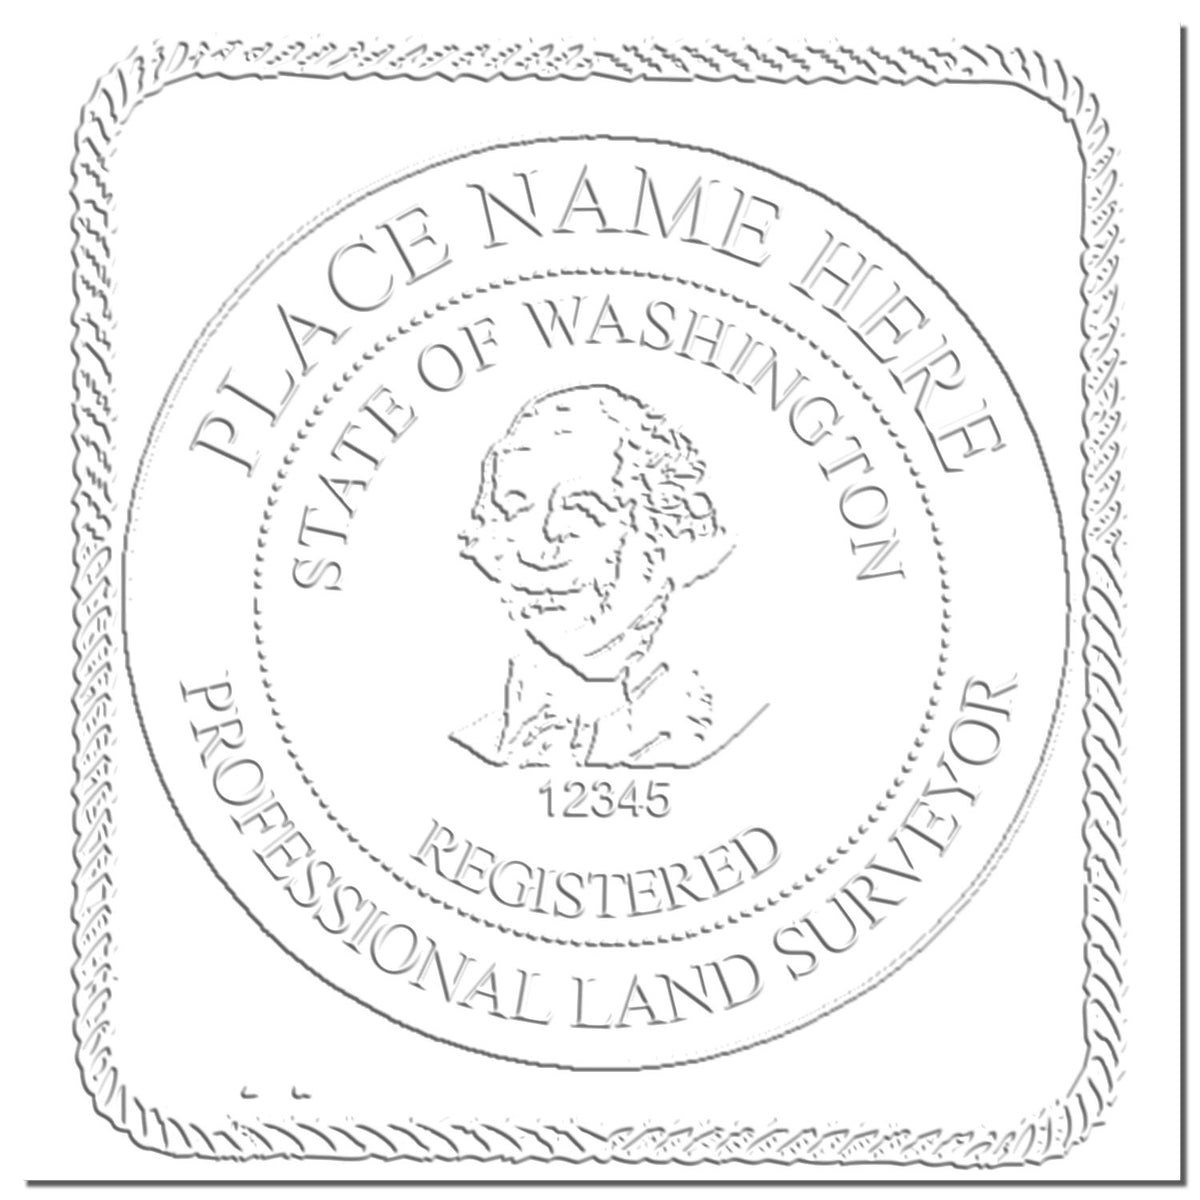 This paper is stamped with a sample imprint of the State of Washington Soft Land Surveyor Embossing Seal, signifying its quality and reliability.